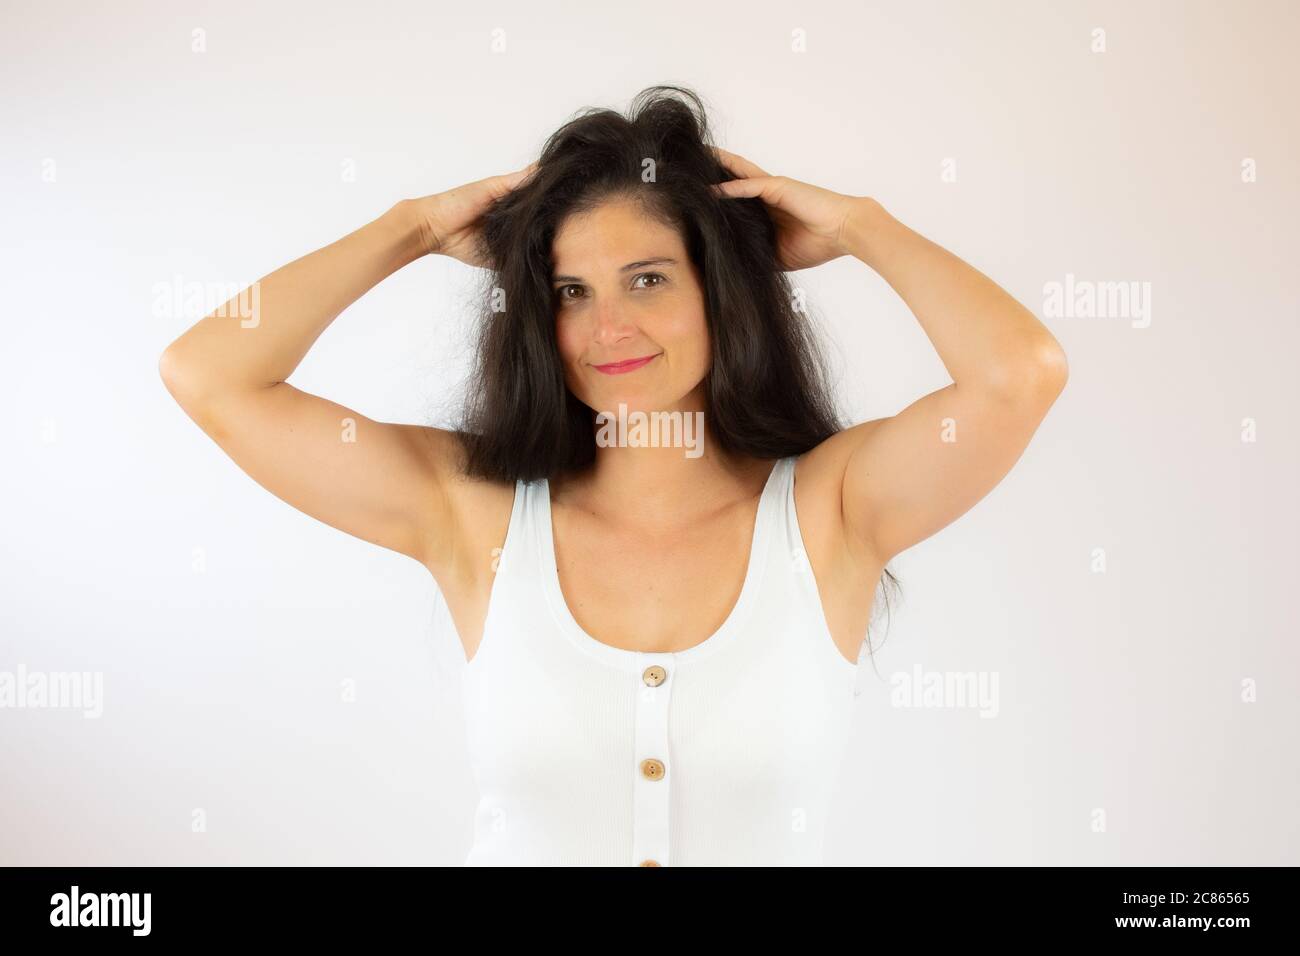 Pretty young woman with long black hair making gesture Stock Photo